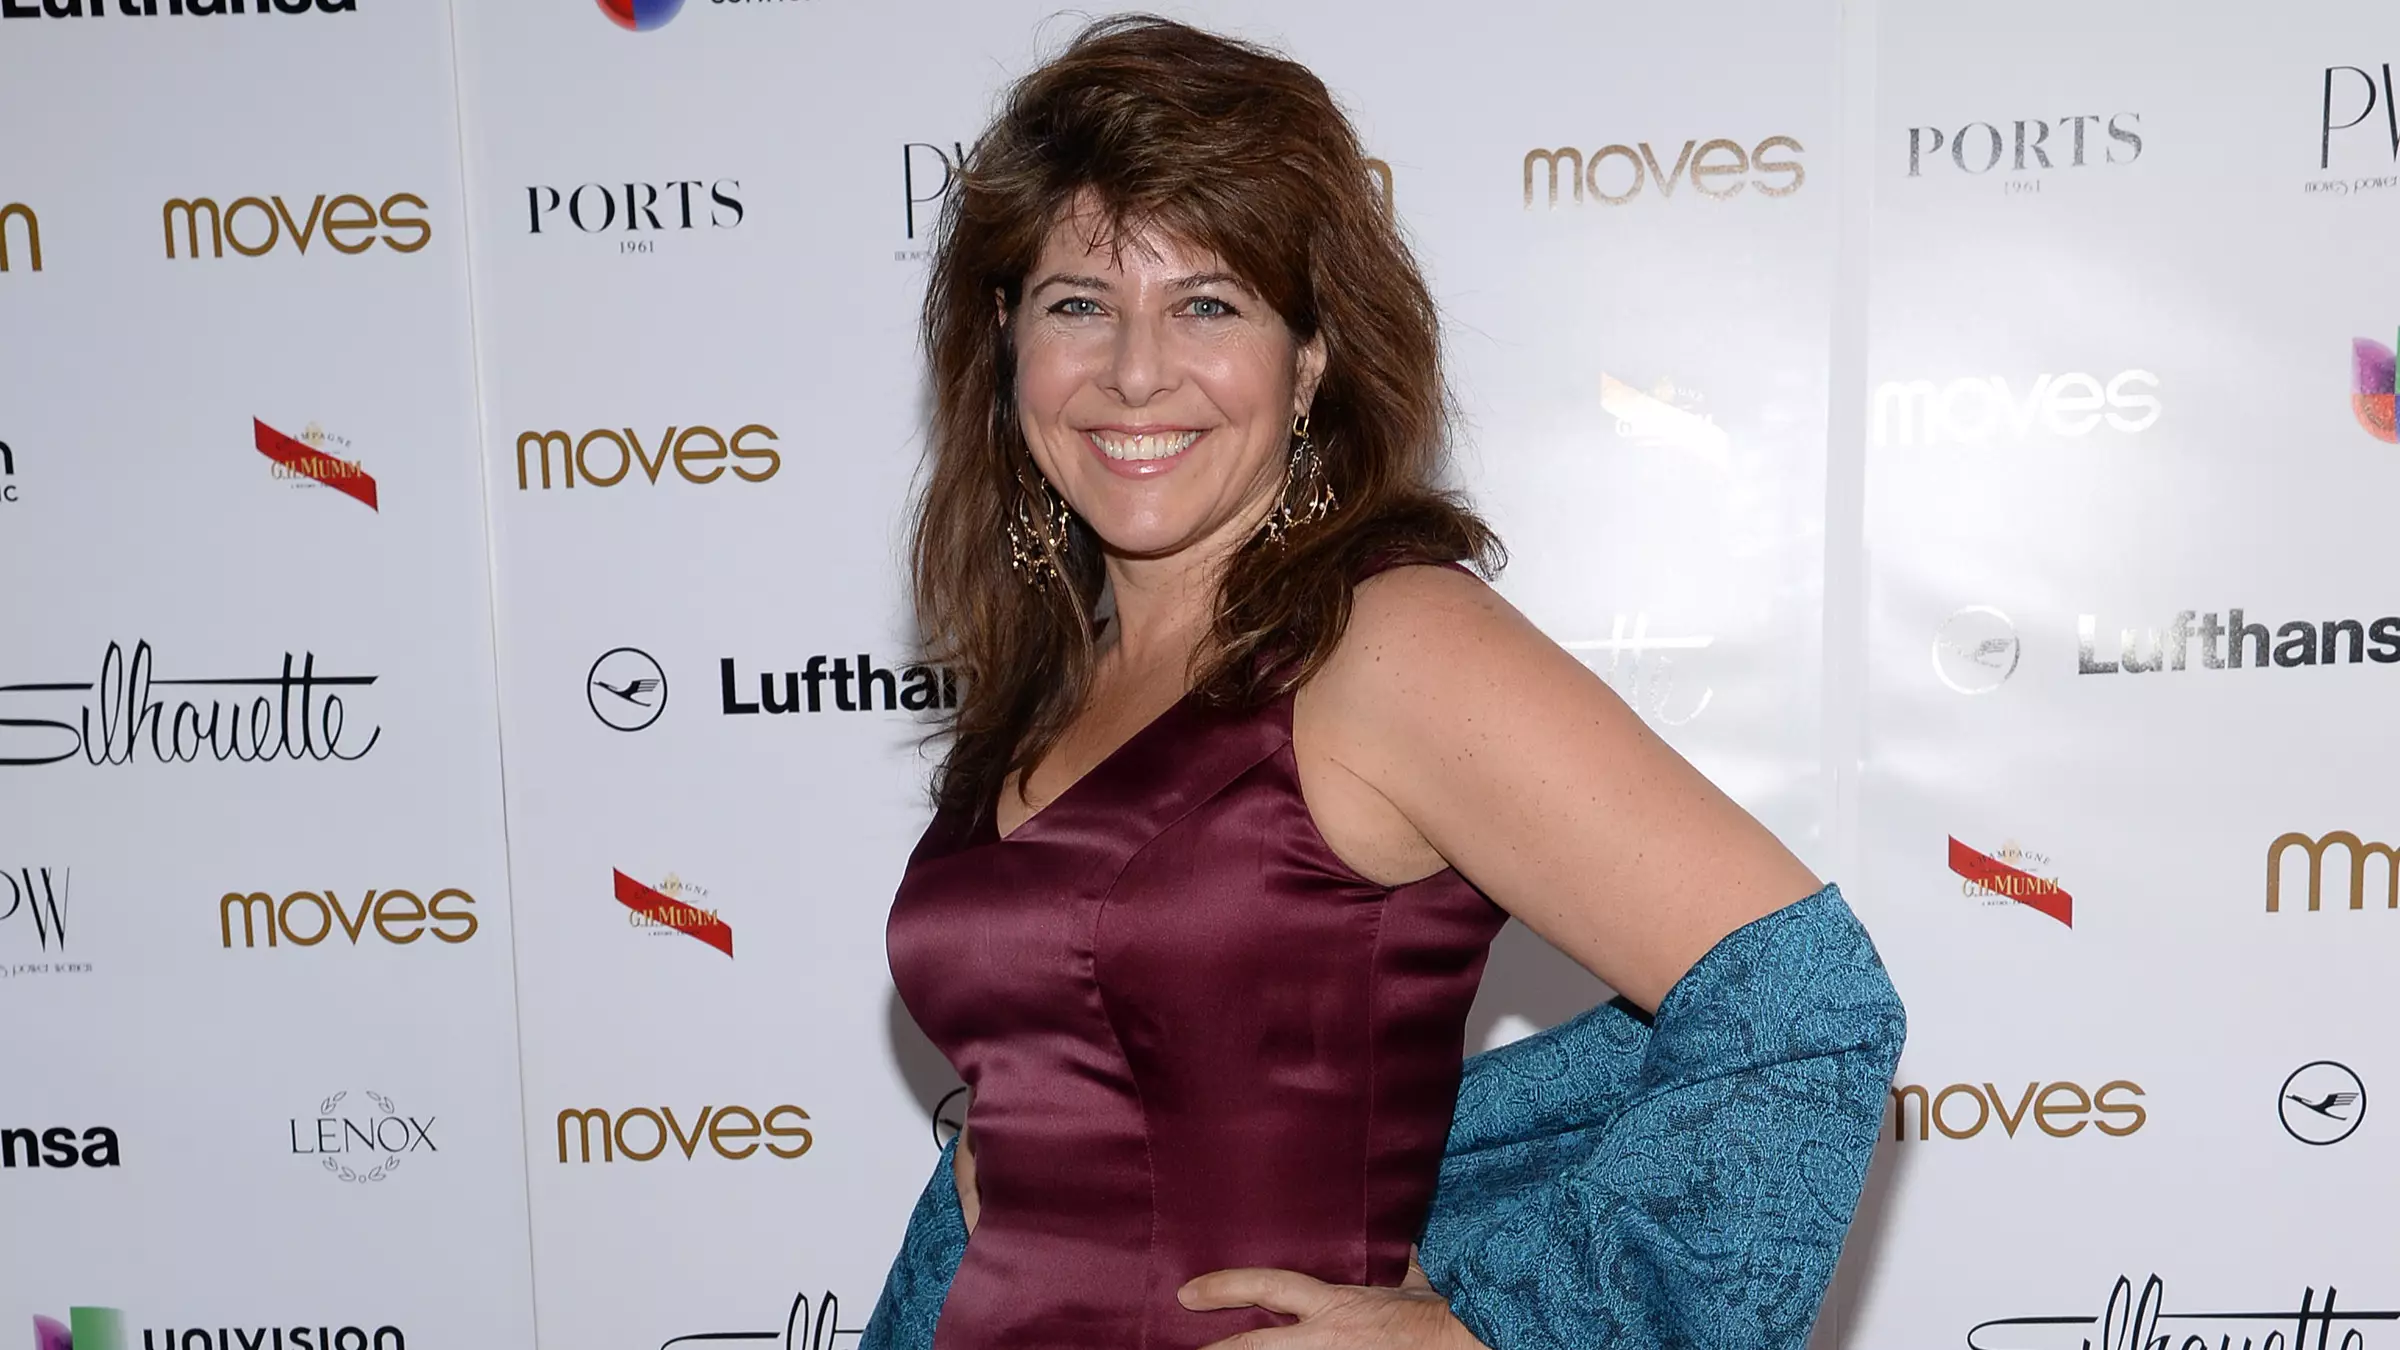 Naomi Wolf Tricked Into Sharing Fake Anti-Vax Quote With Photo Of Adult Star Johnny Sins